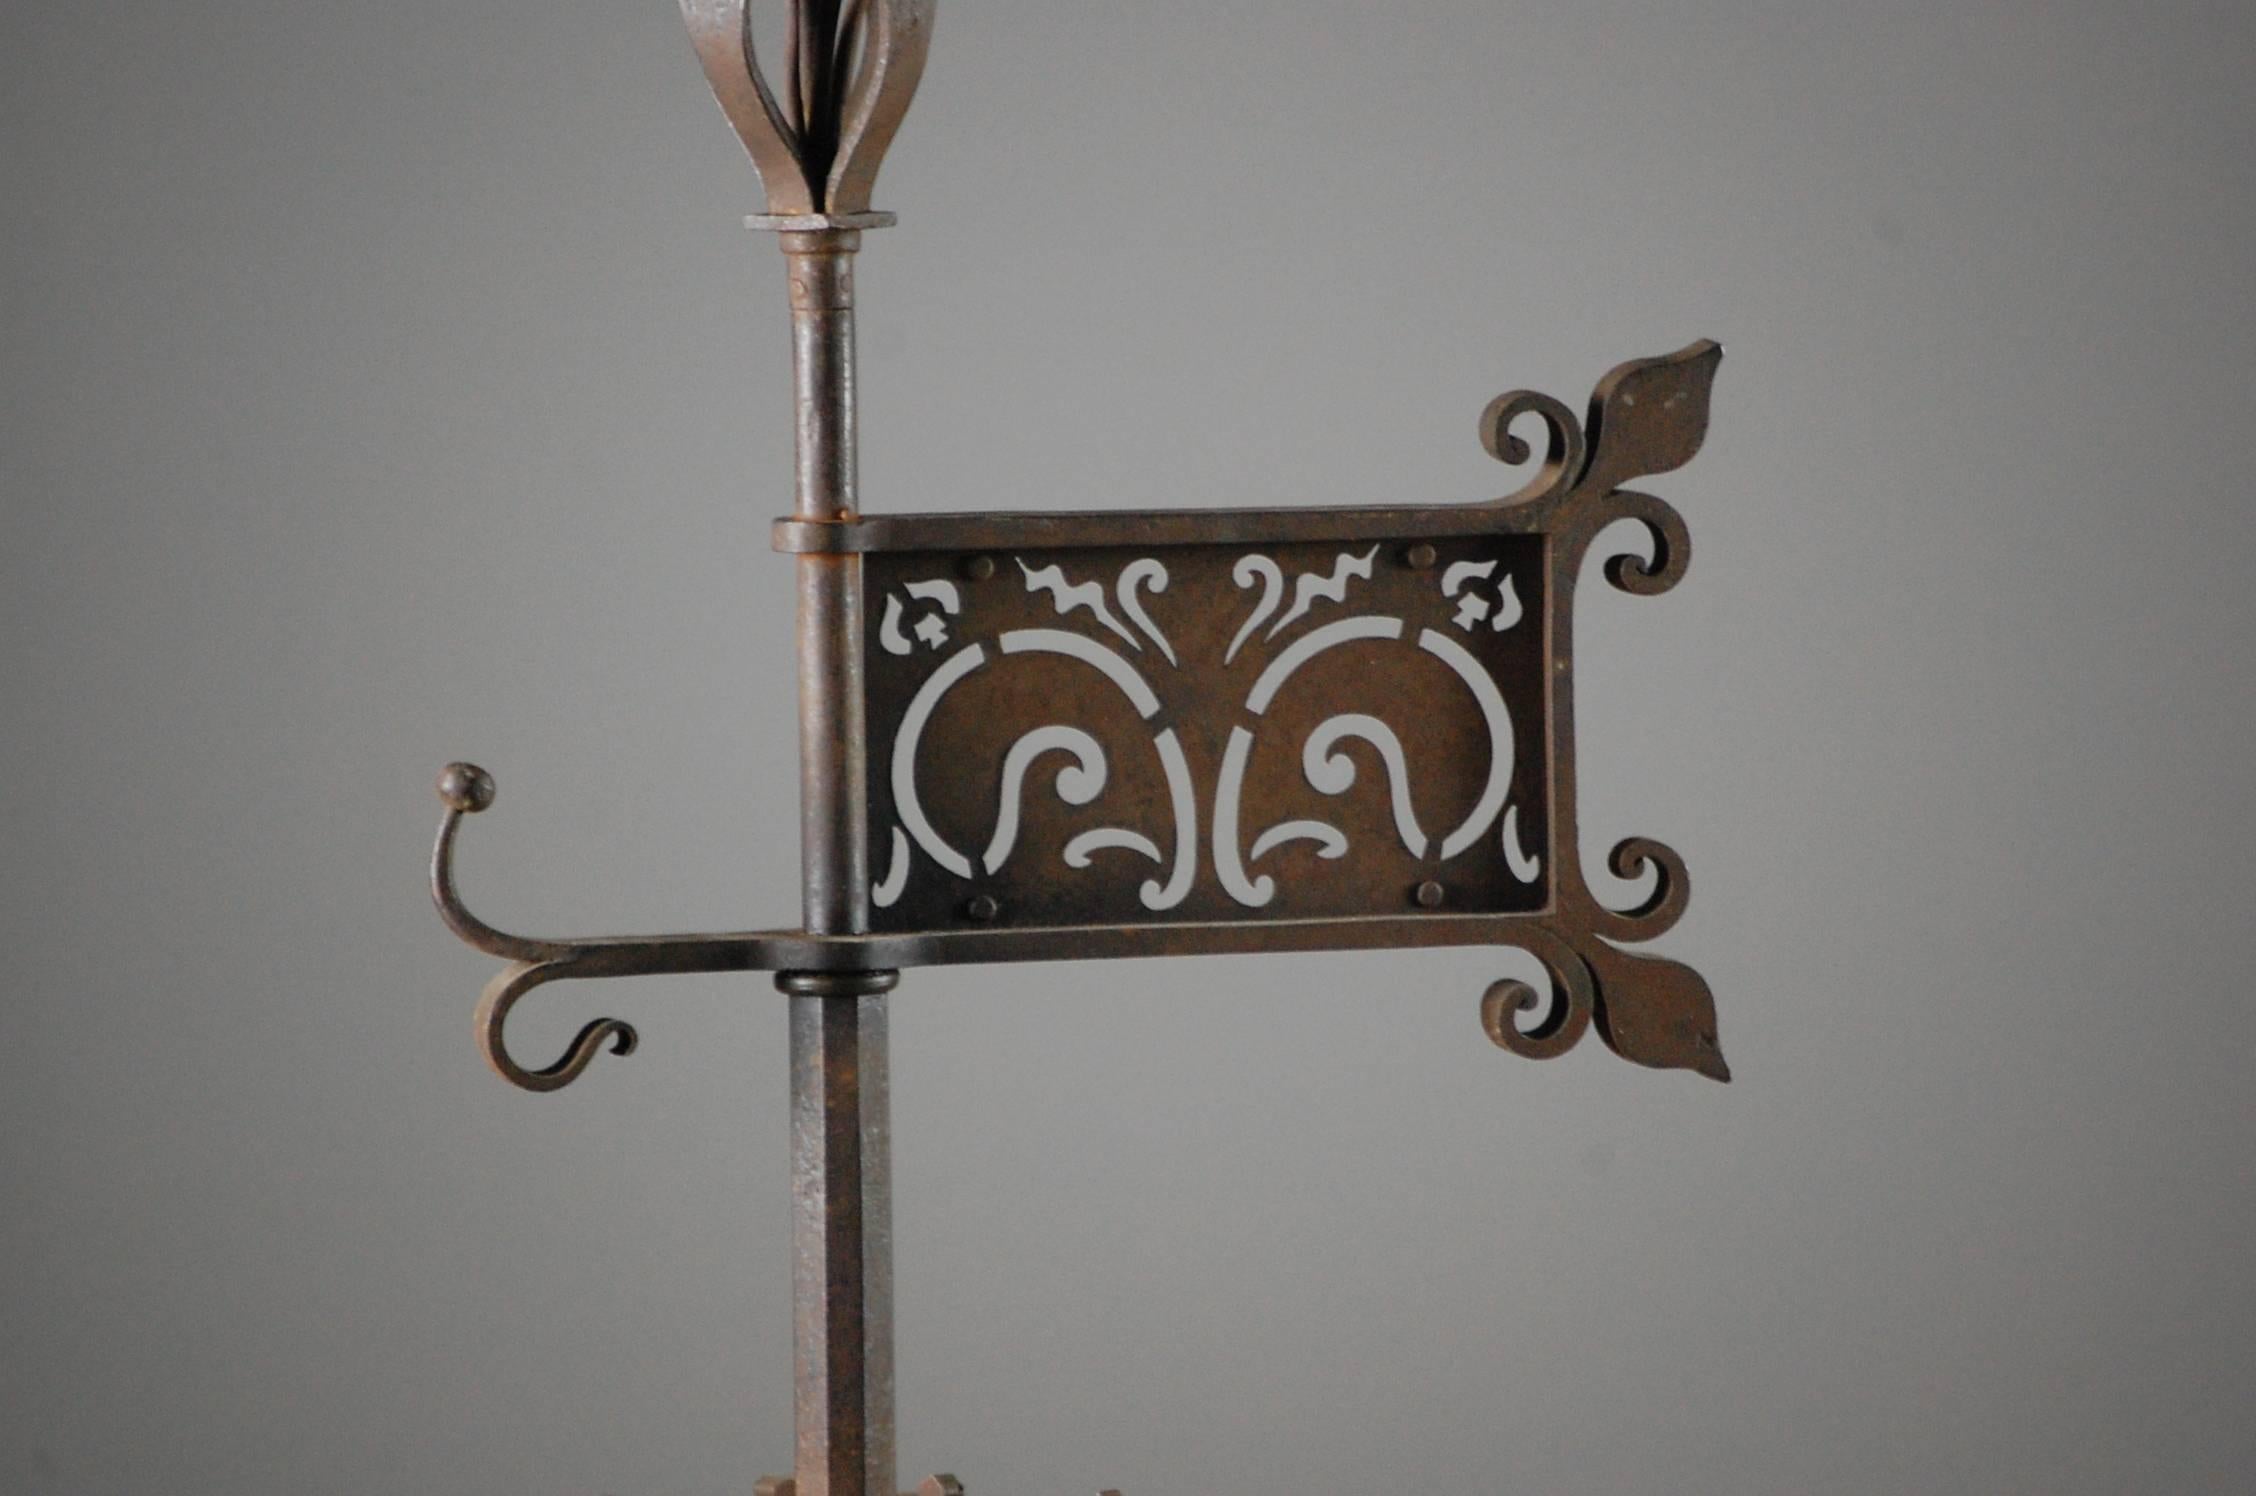 French Banner Weathervane Finial  In Fair Condition In Pease pottage, West Sussex